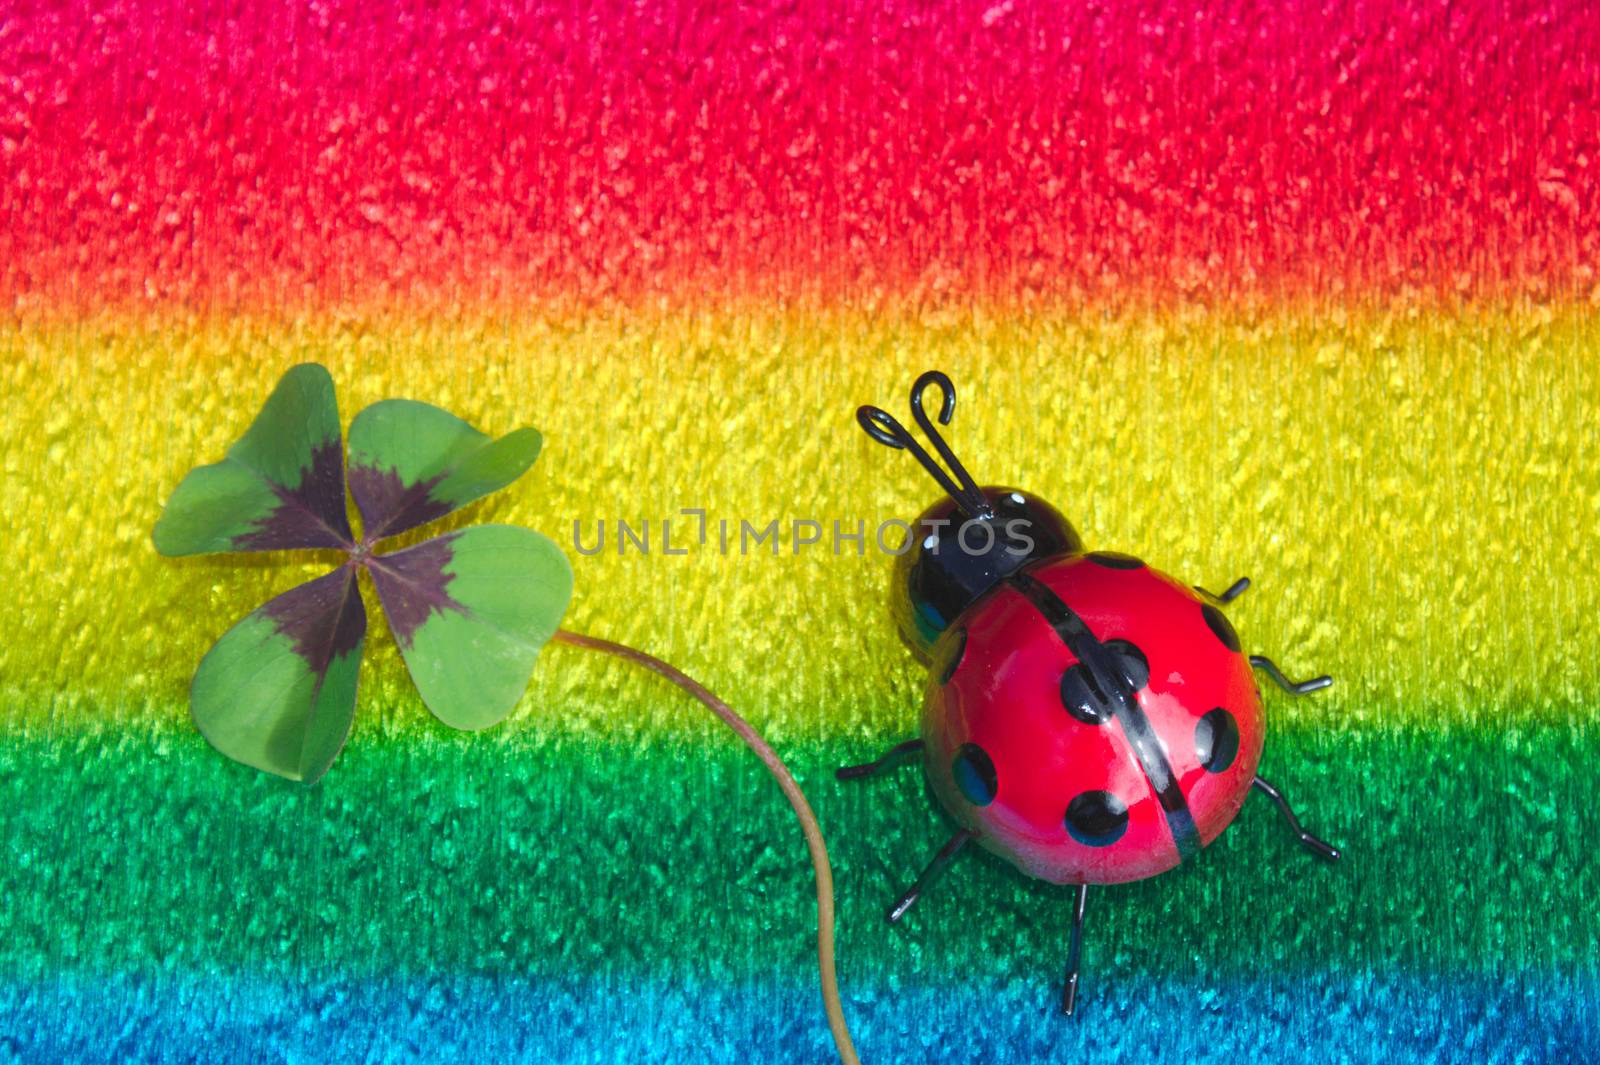 The picture shows a ladybird and lucky clover on colorful crepe paper